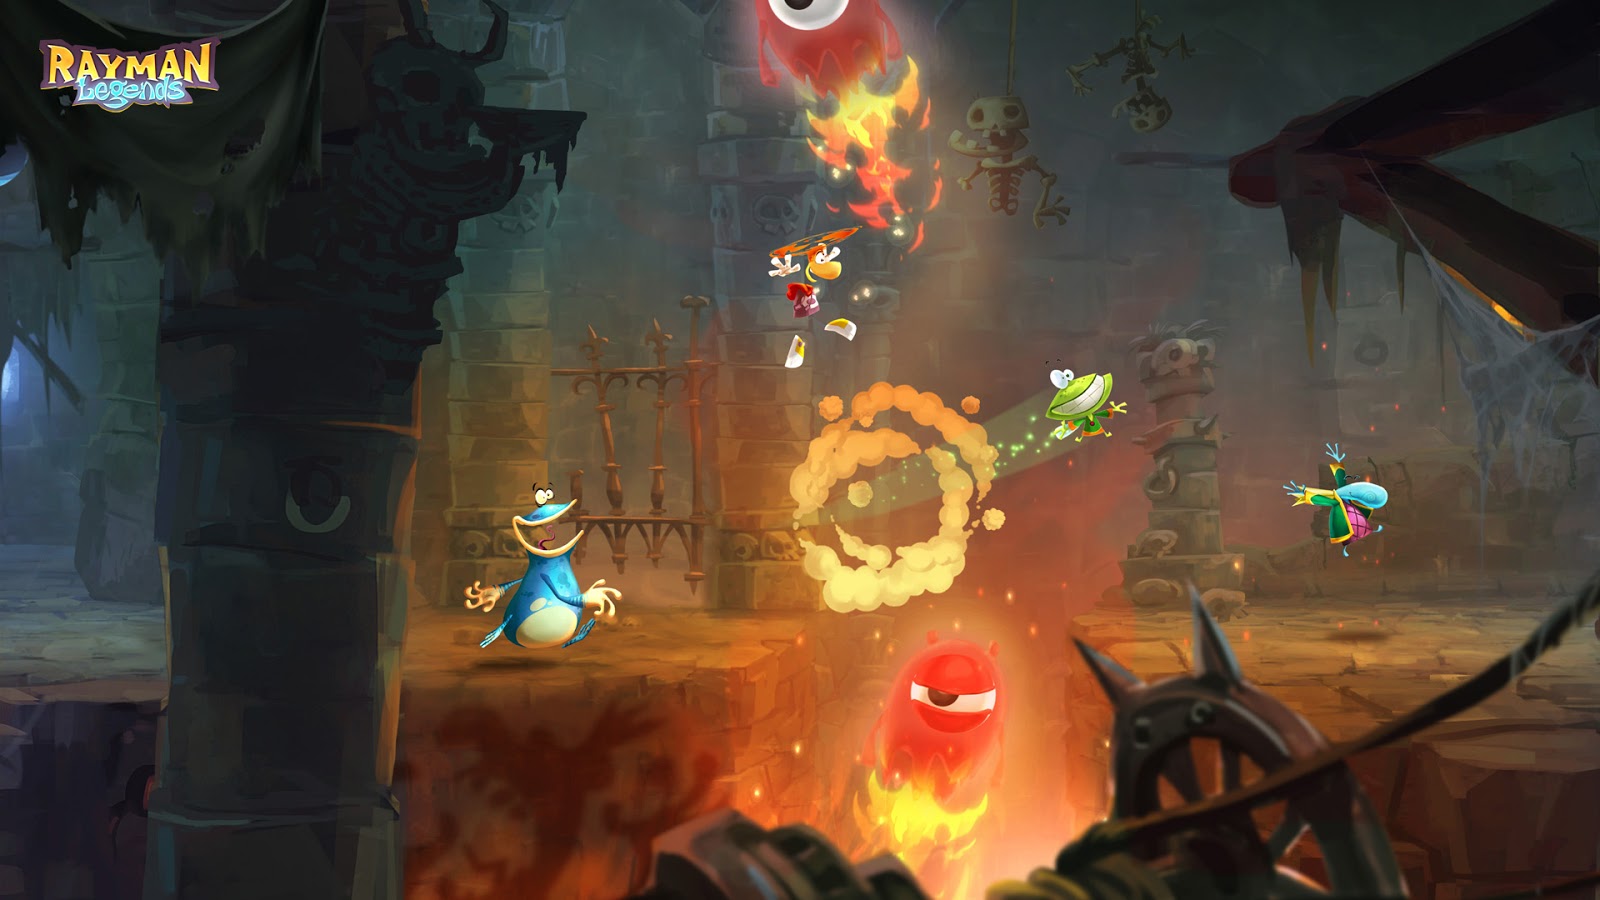 At Darren's World of Entertainment: Rayman Legends: PS3 Review